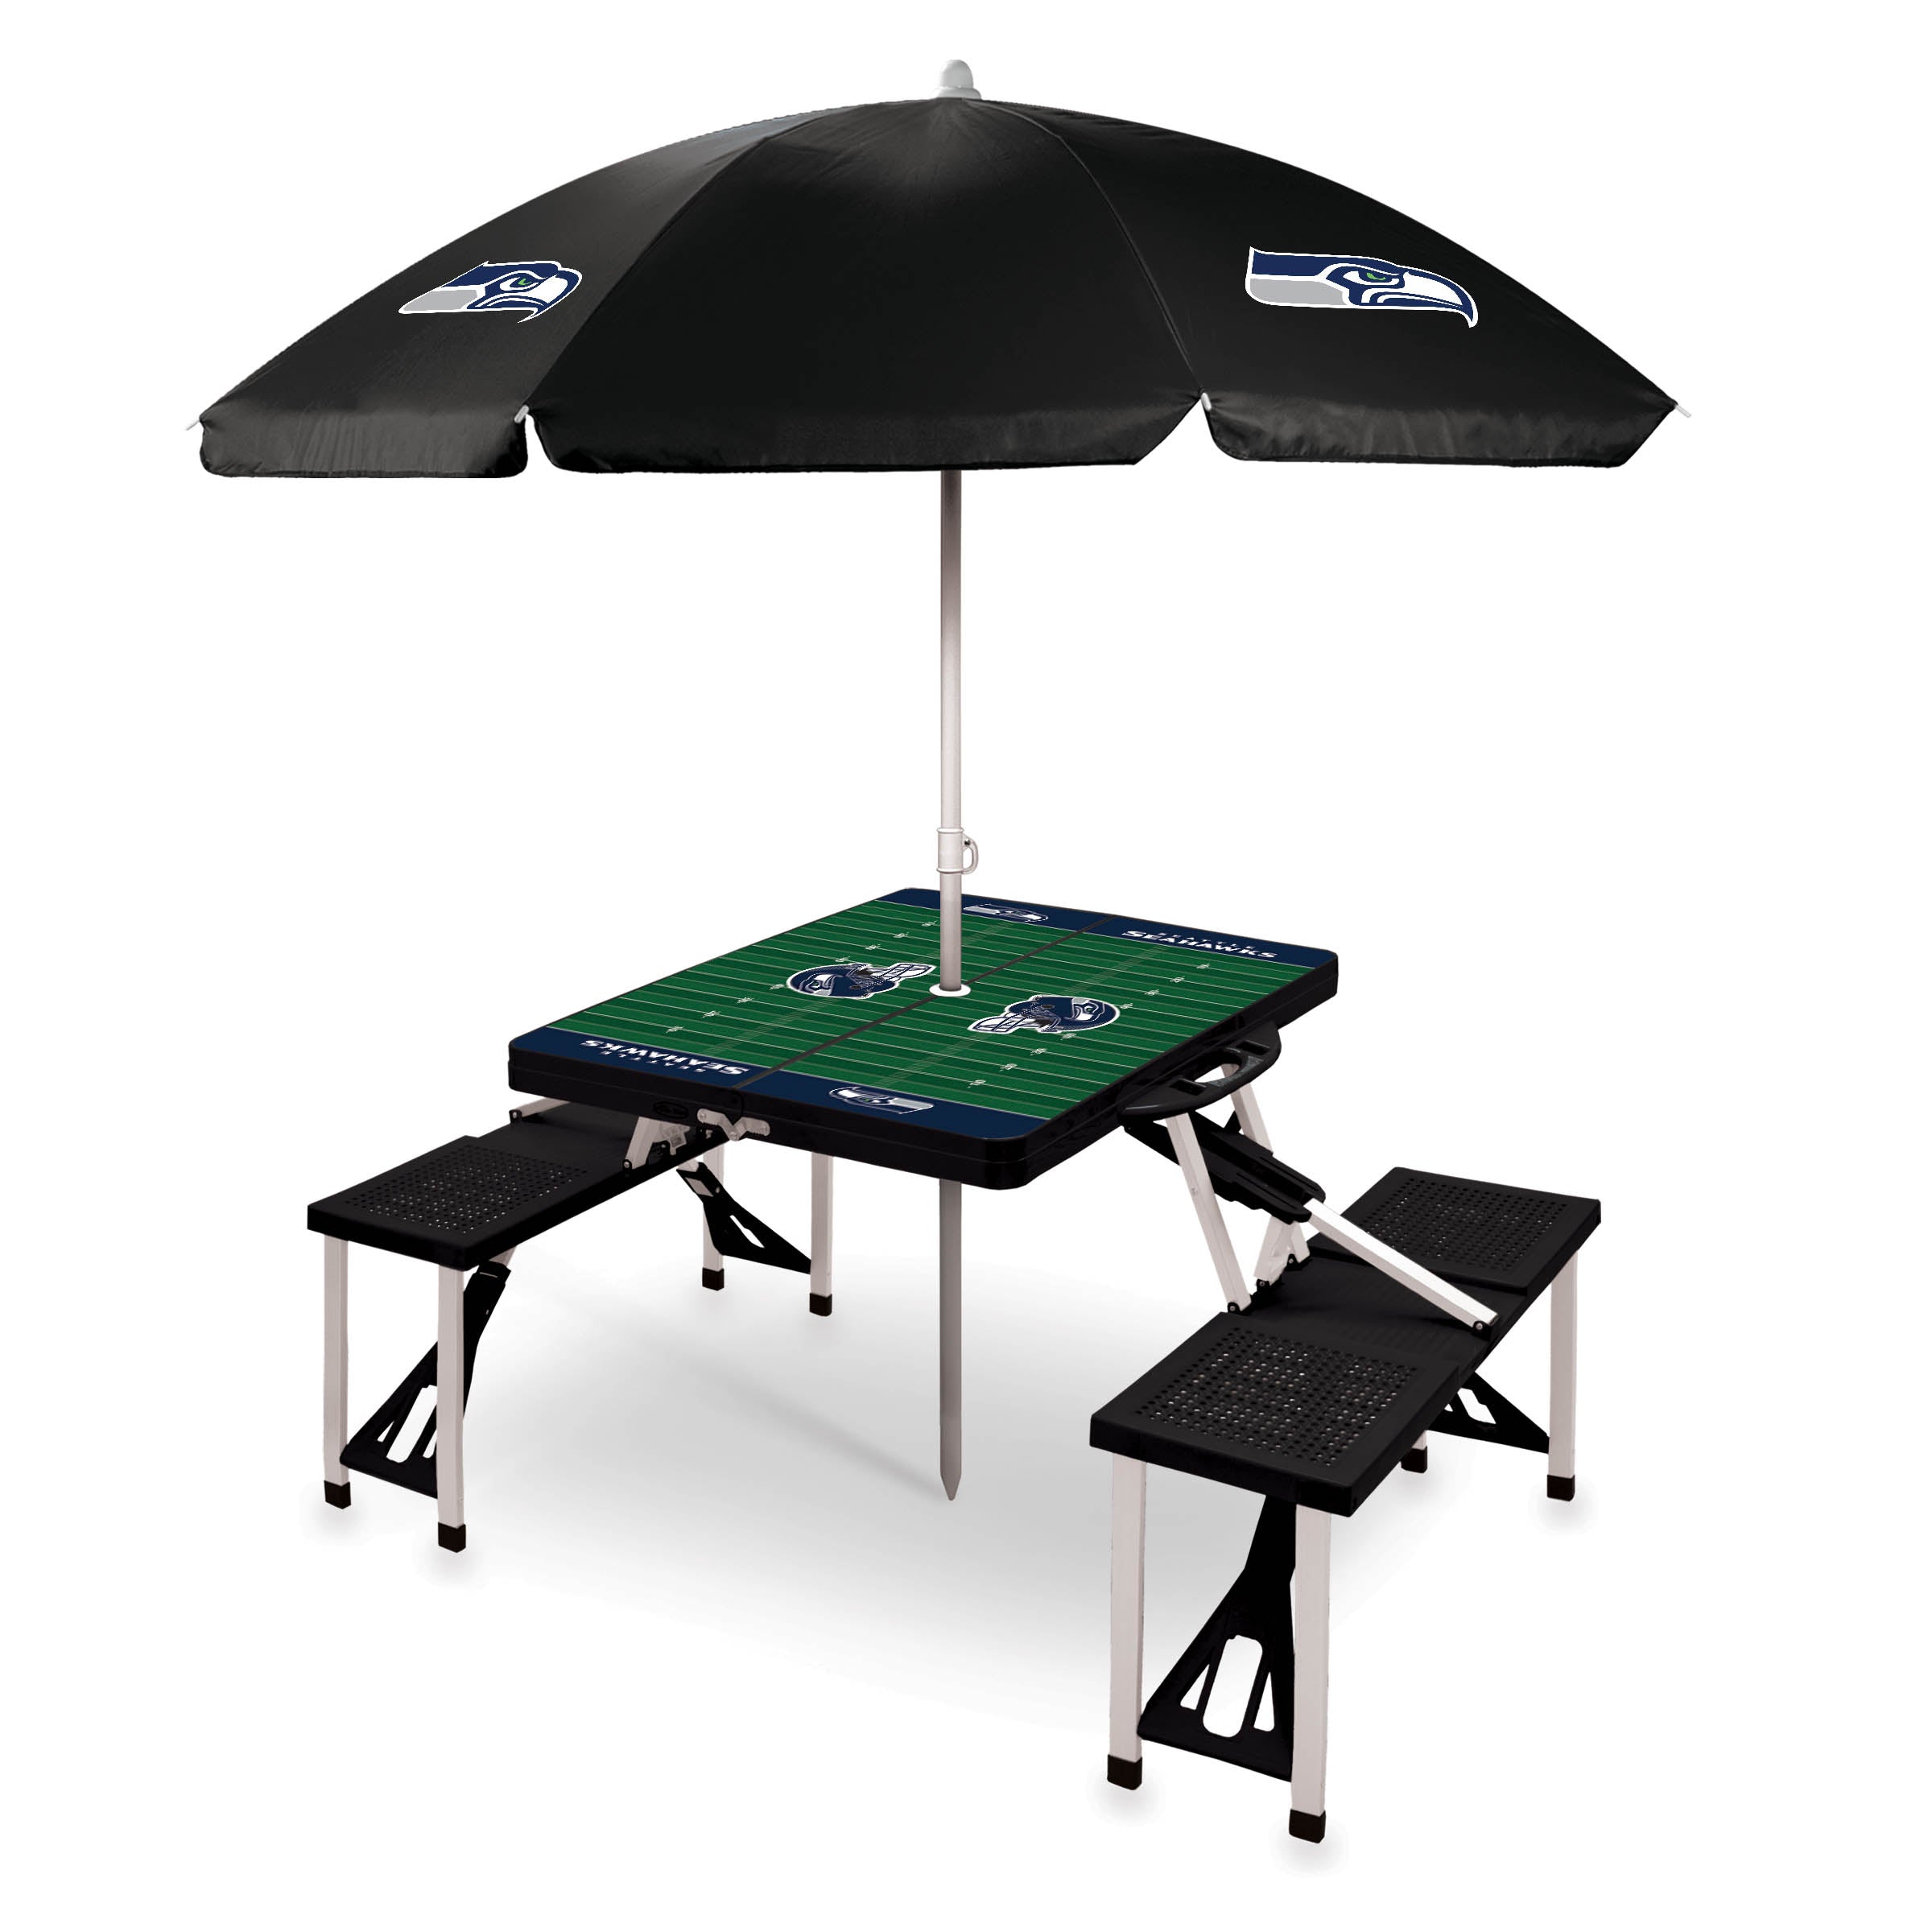 Seattle Seahawks - Picnic Table Portable Folding Table with Seats and Umbrella